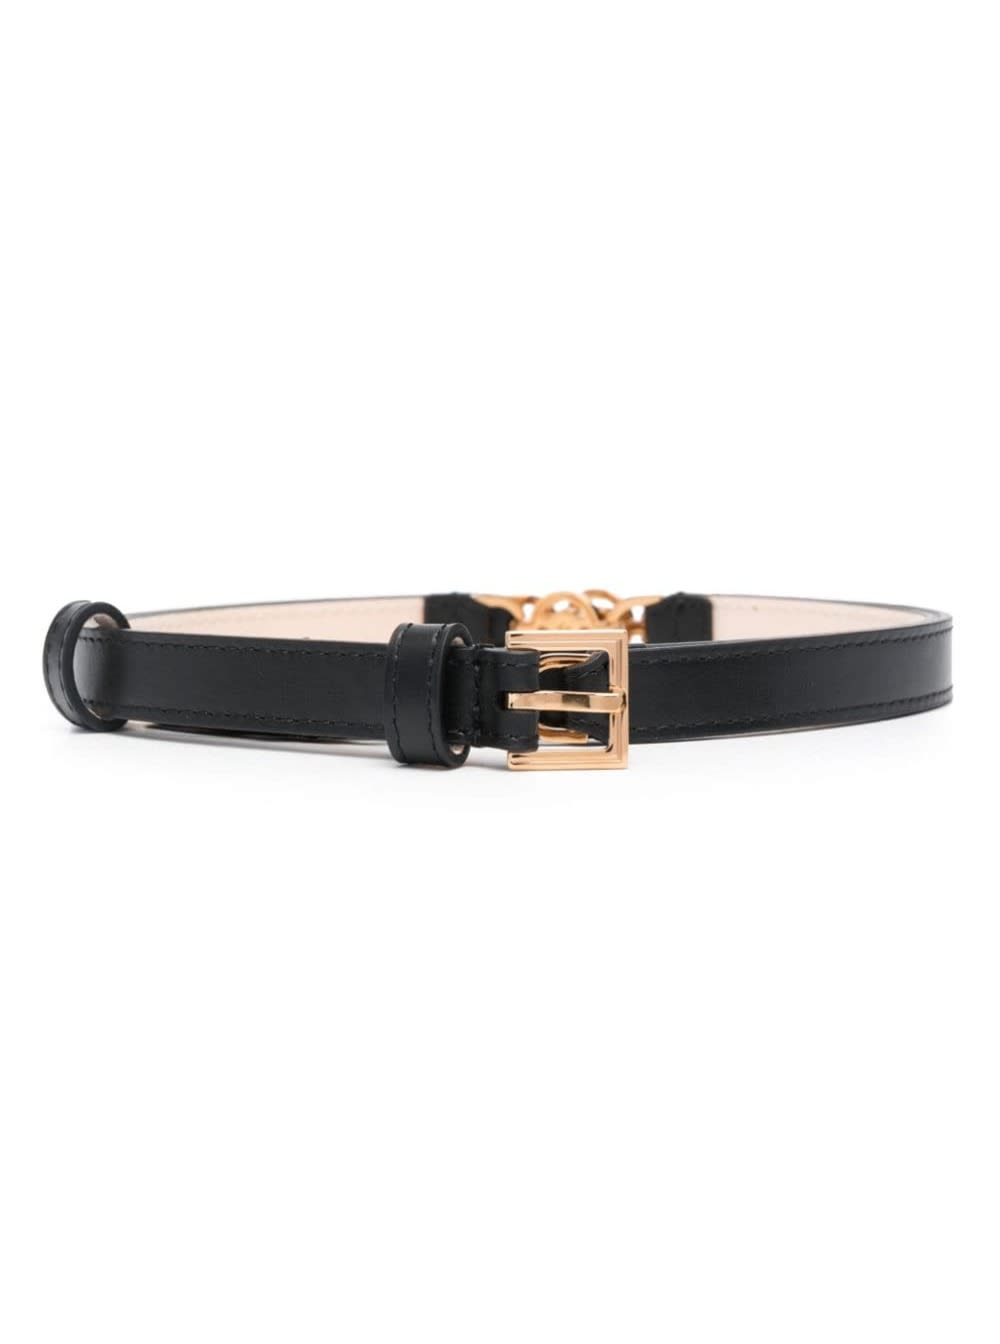 Versace Black Belt With Golden Buckle And Medusa Detail In Smooth Leather Woman